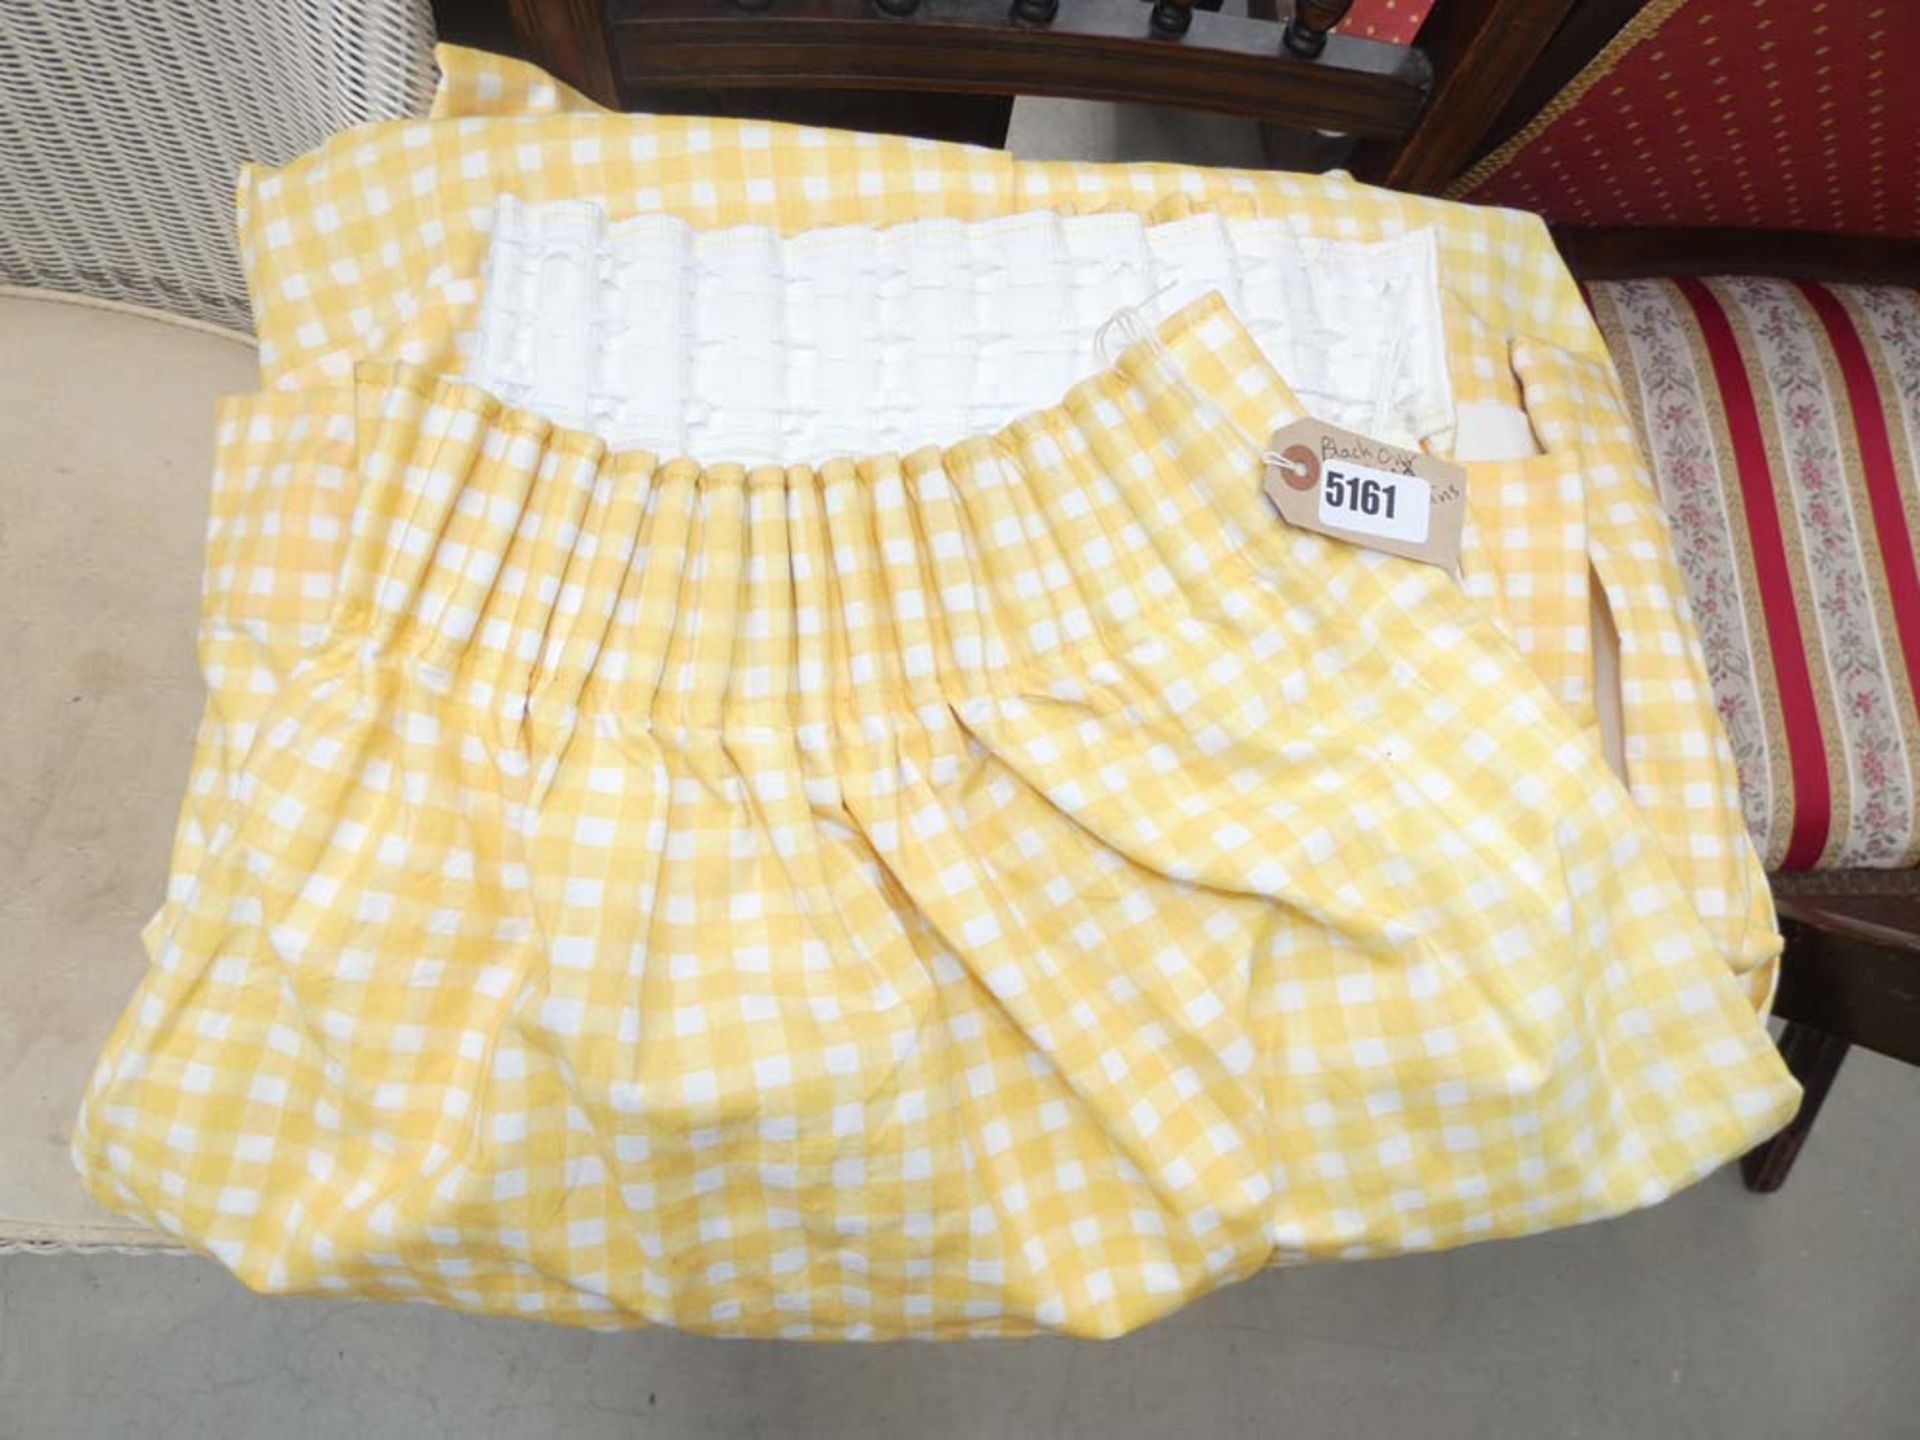 Pair of lined yellow gingham pattered curtains